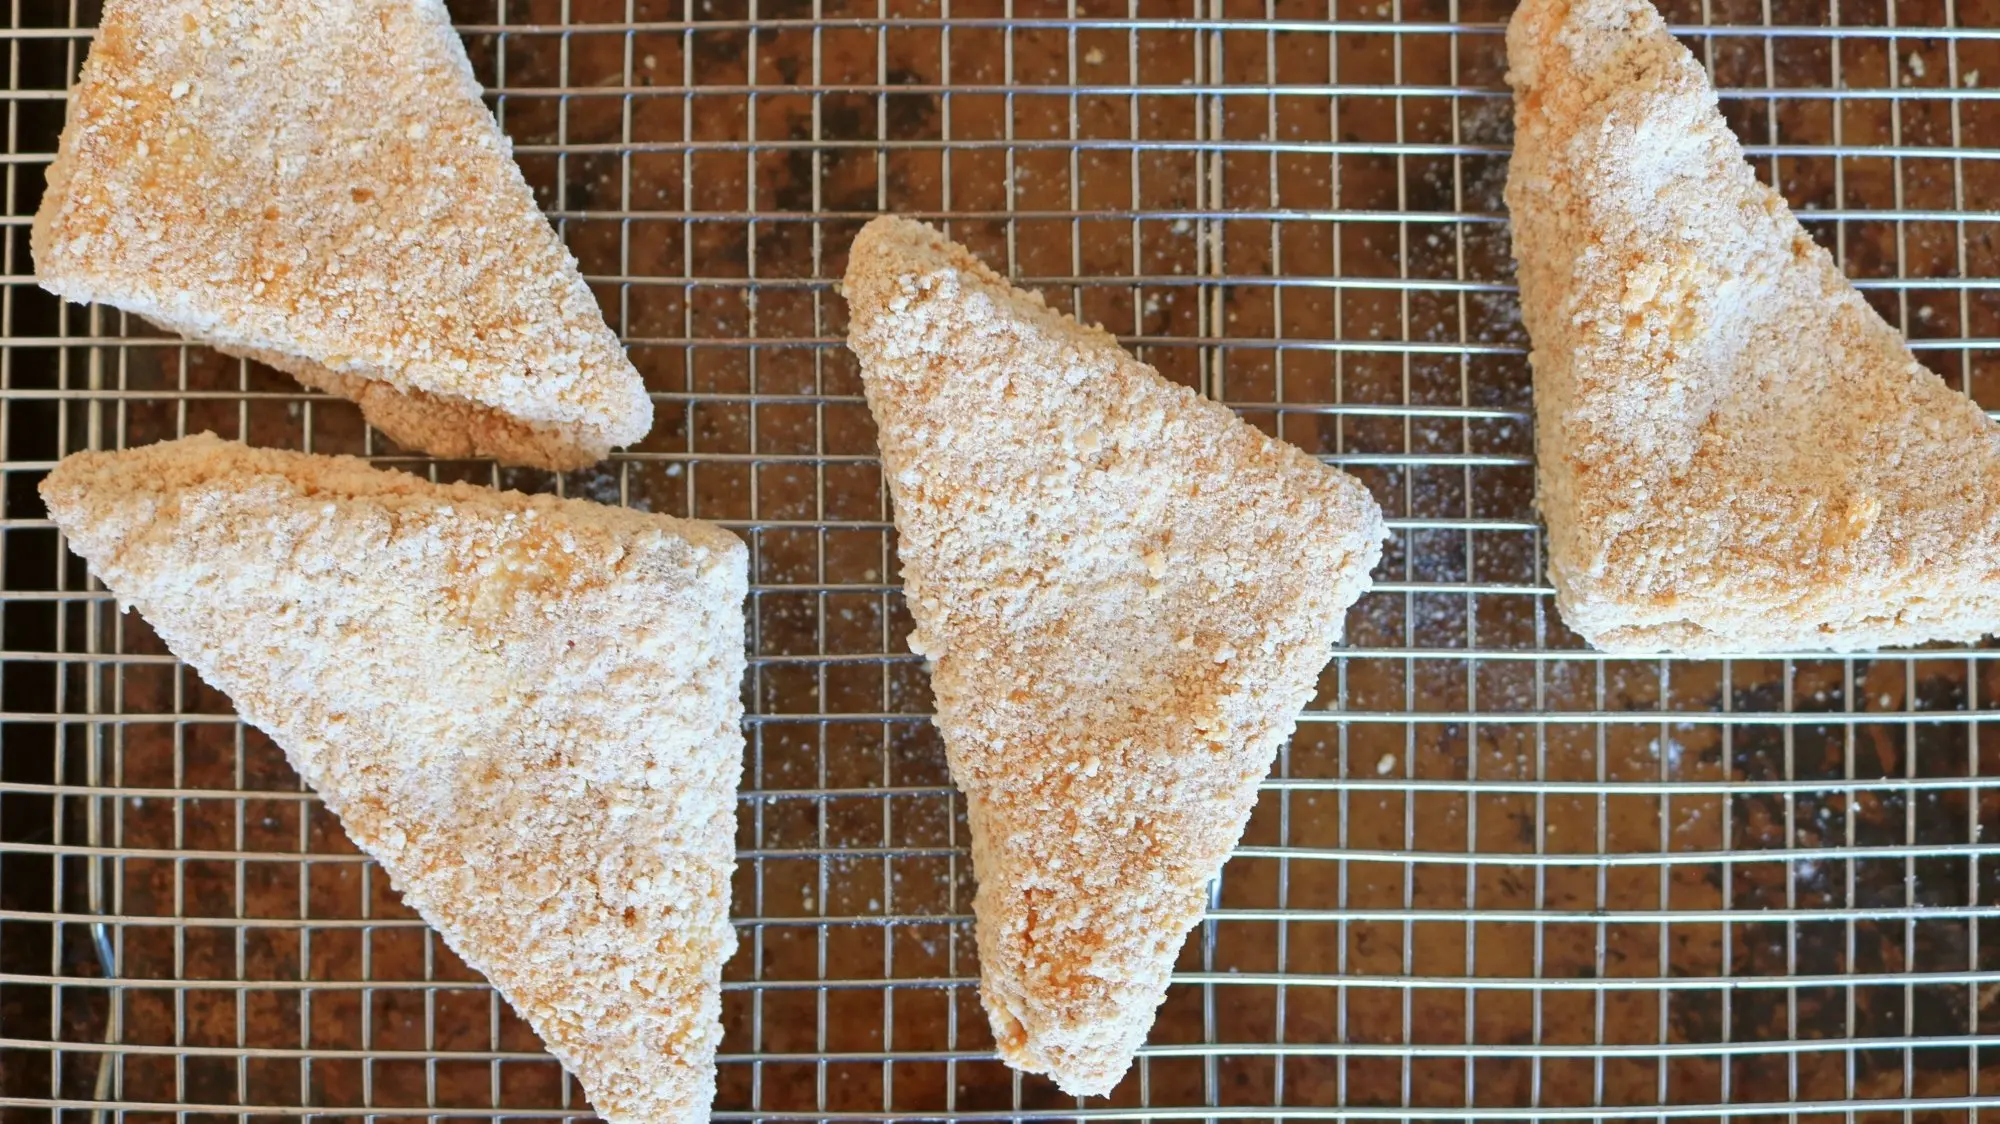 Triangles of breaded sandwiches on a wire rack.